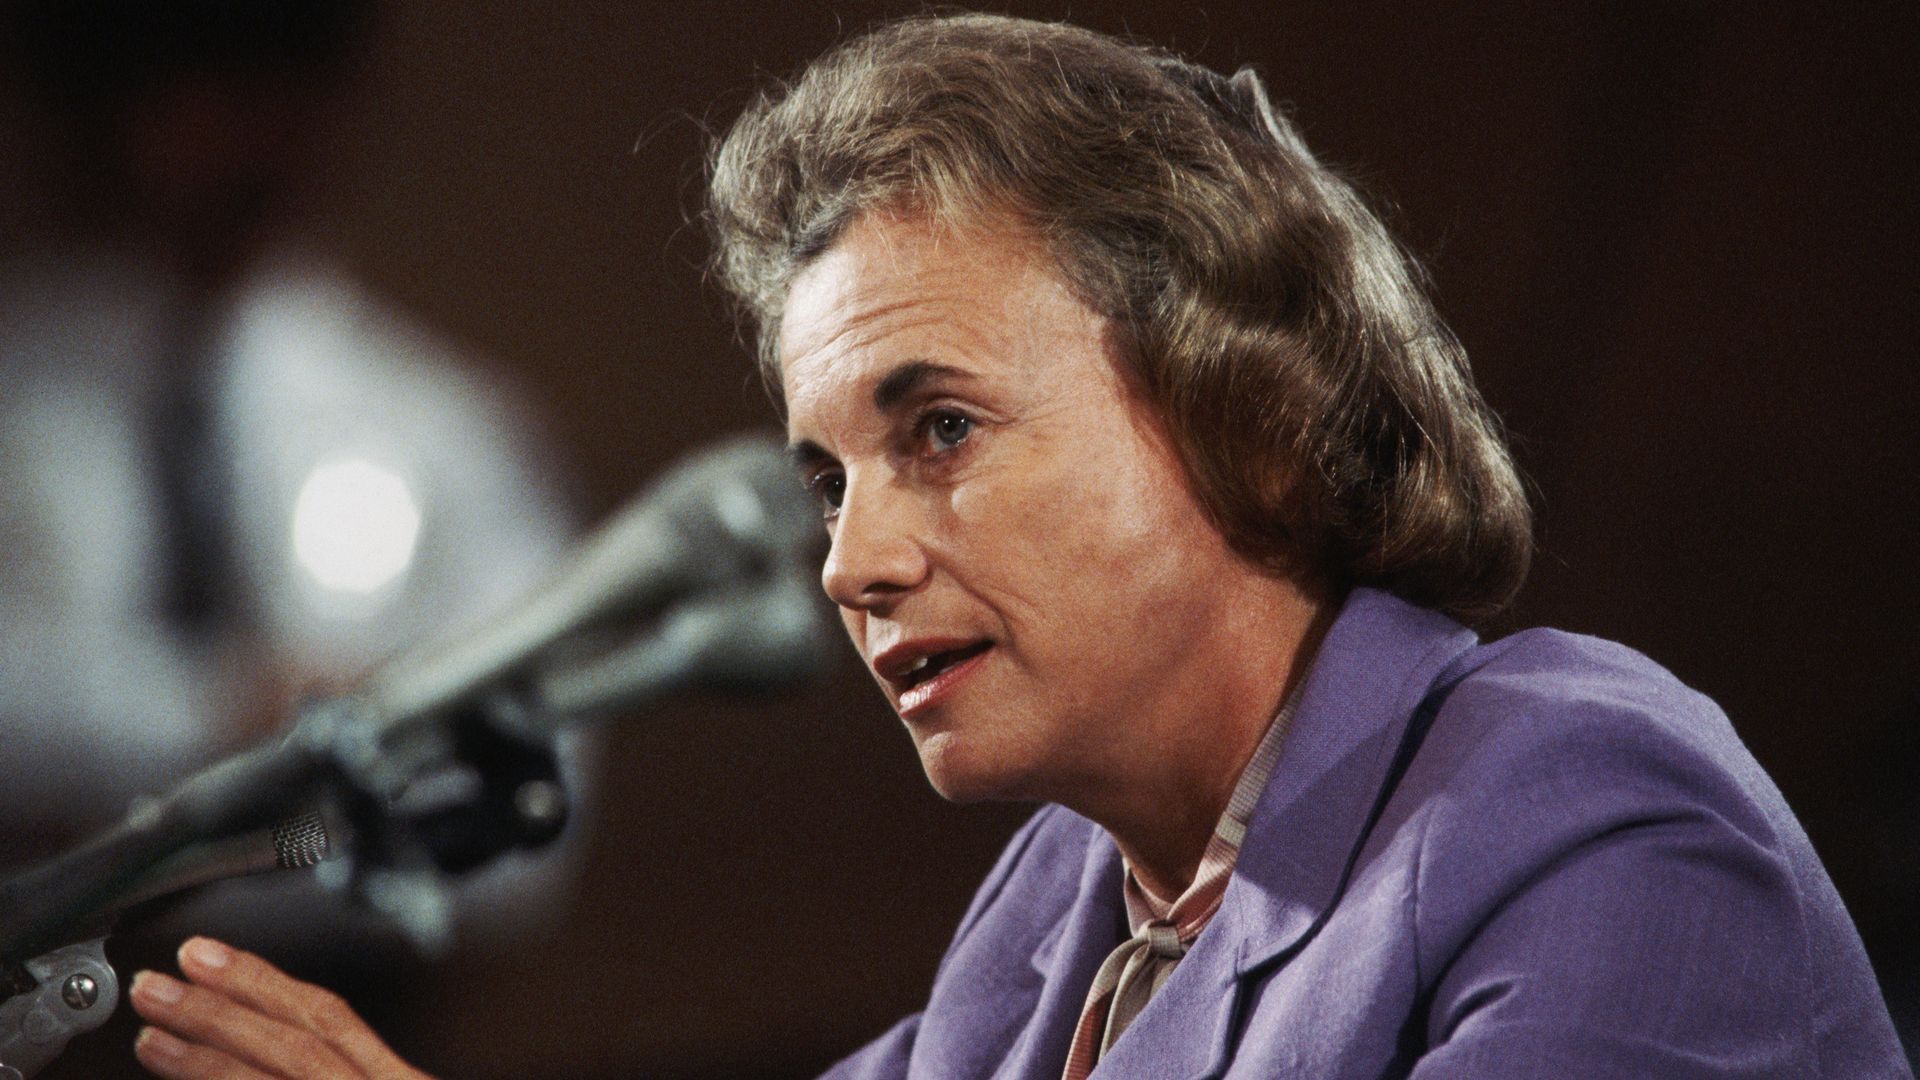 Sandra Day O’Connor during her confirmation hearing in 1981.